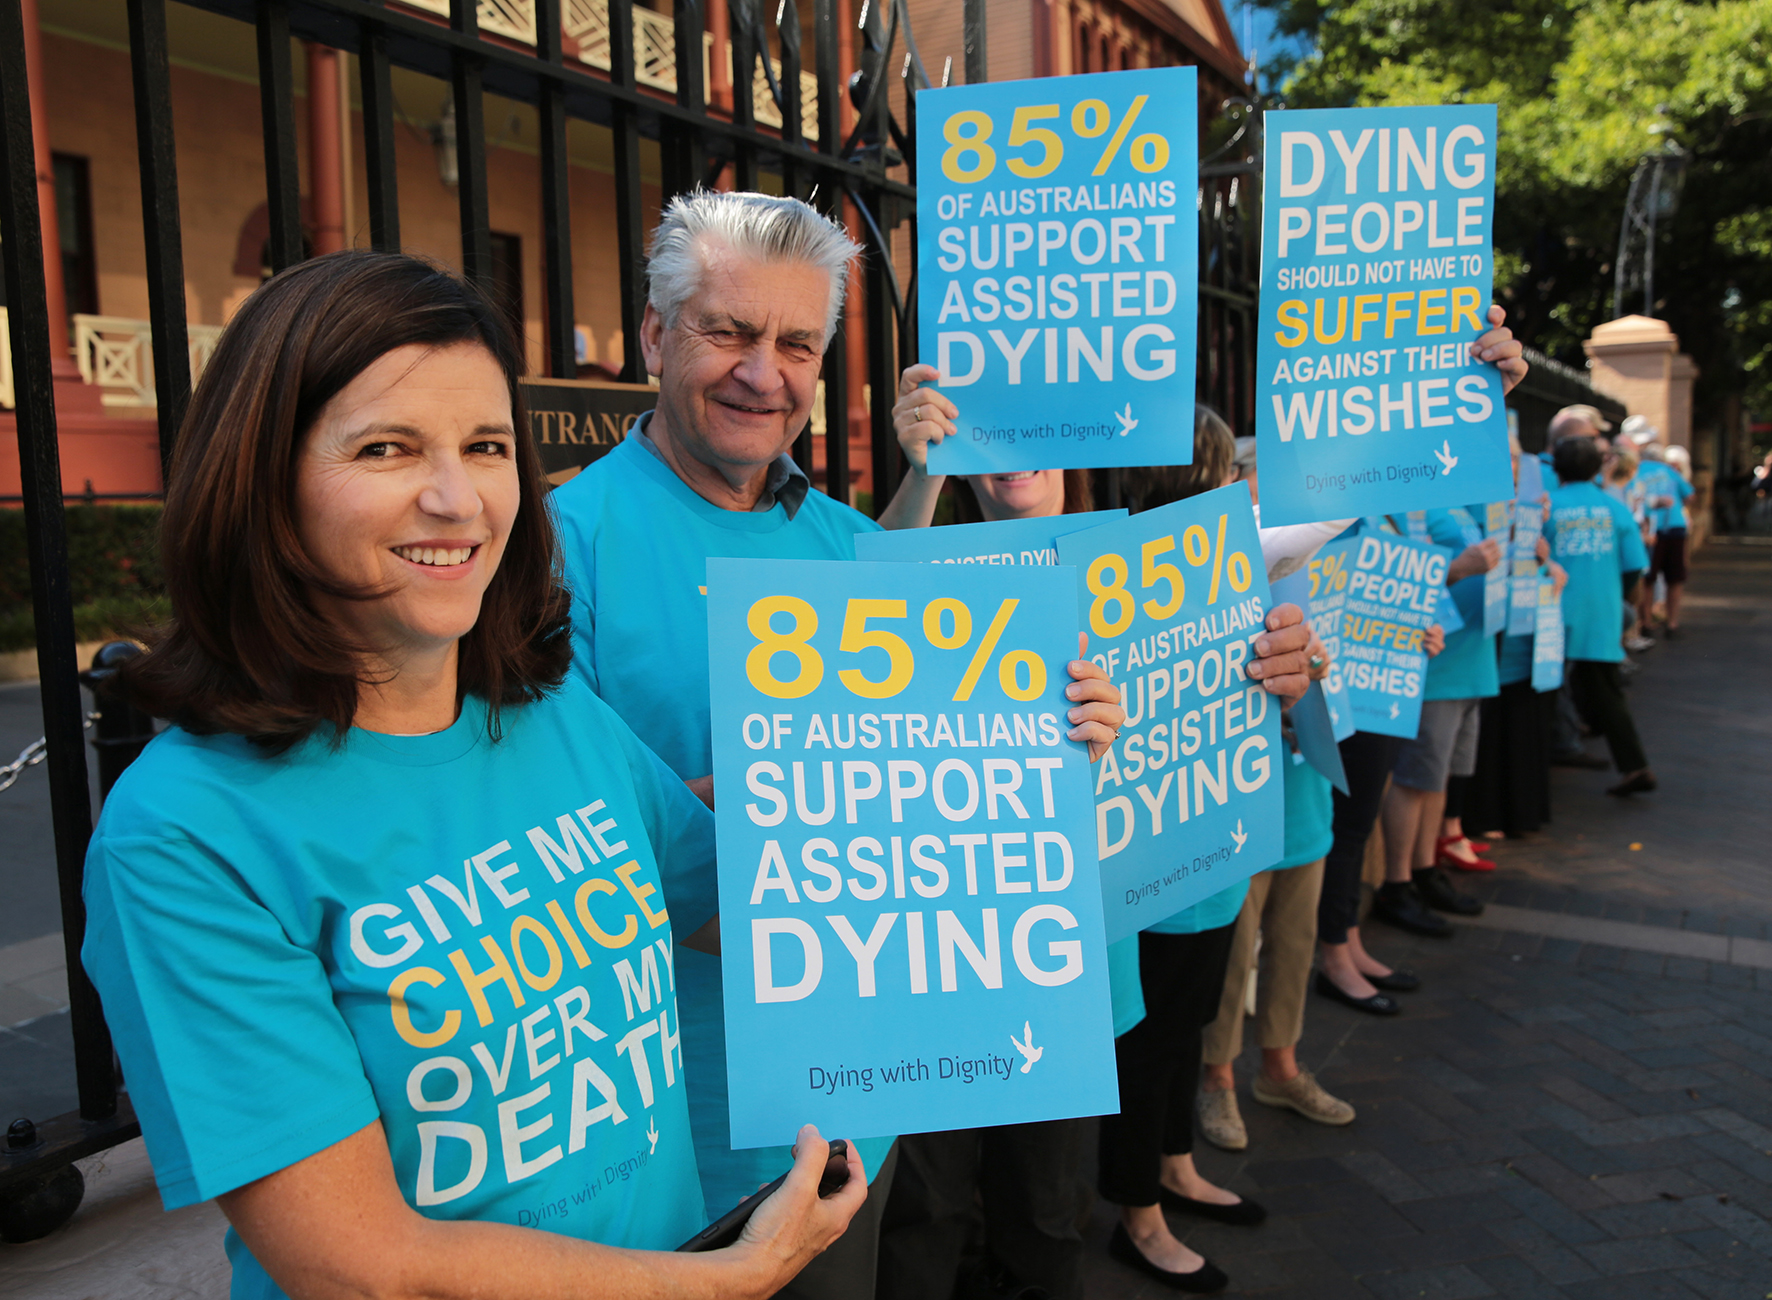 Voluntary assisted dying debate reignited by NSW Parliament bill